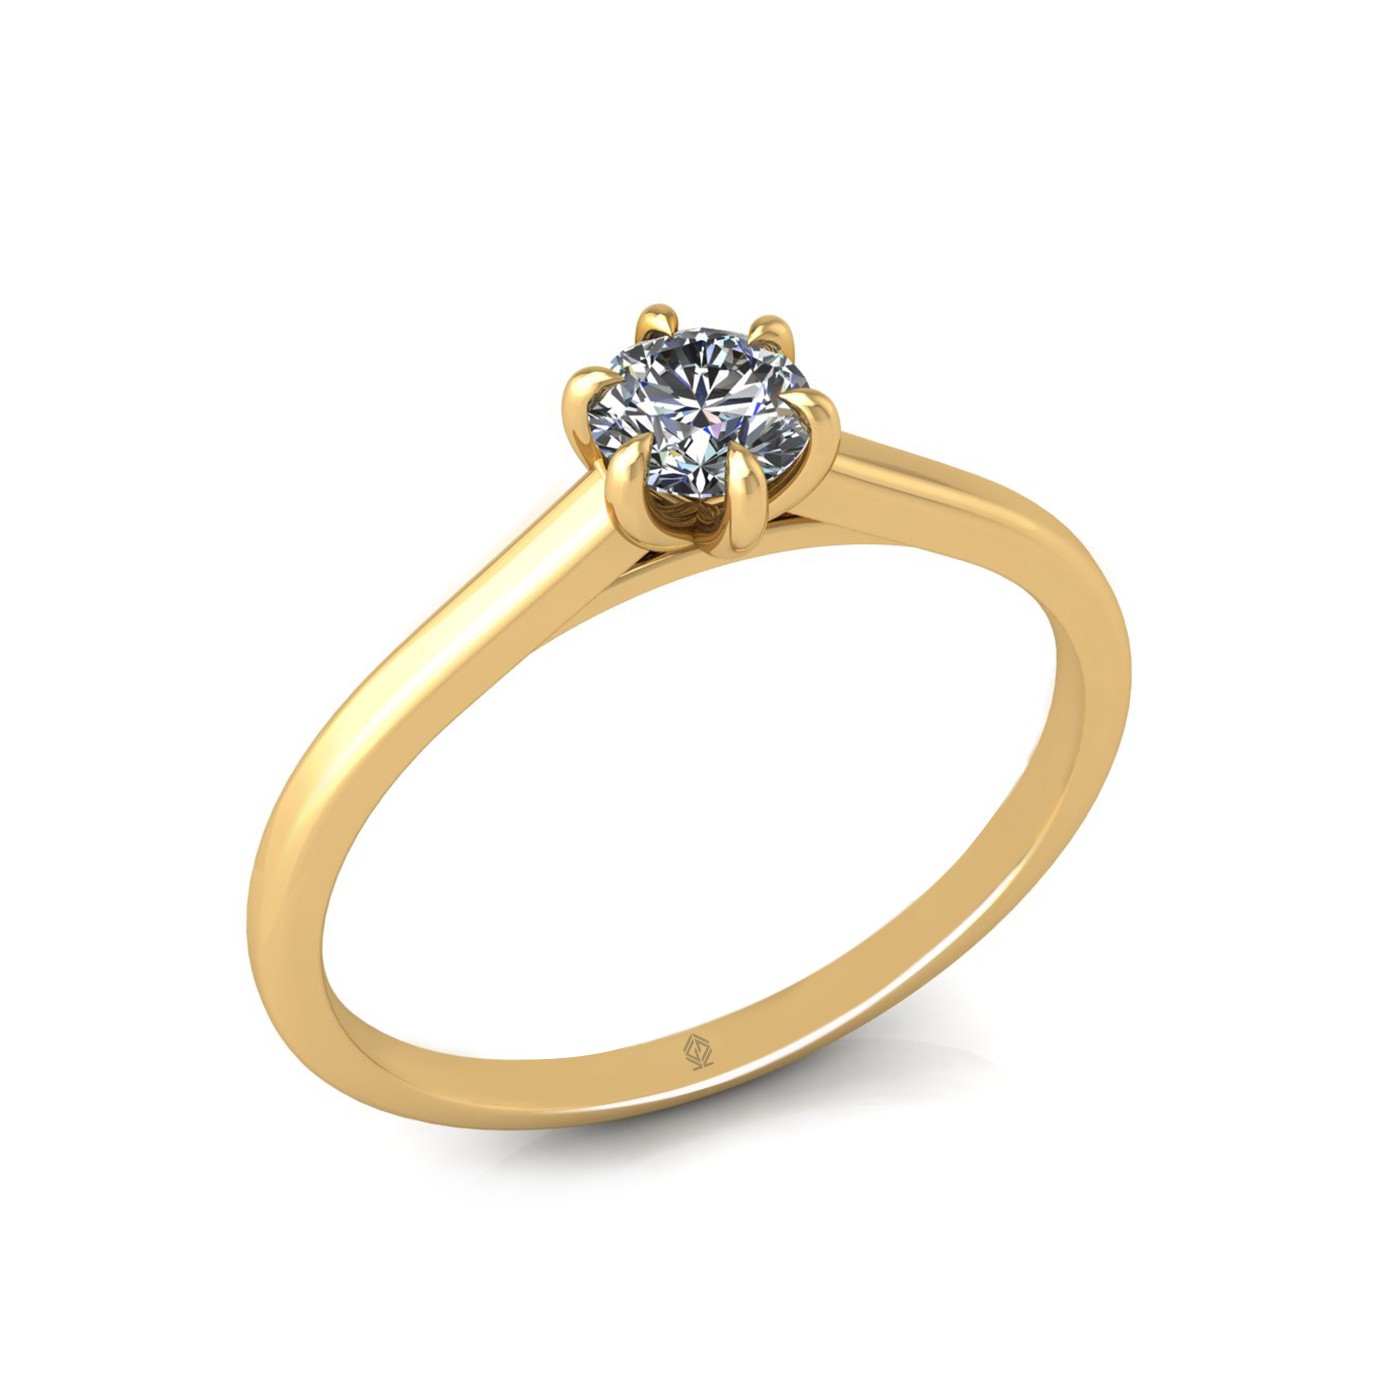 18k yellow gold 0,30 ct 6 prongs solitaire round cut diamond engagement ring with whisper thin band